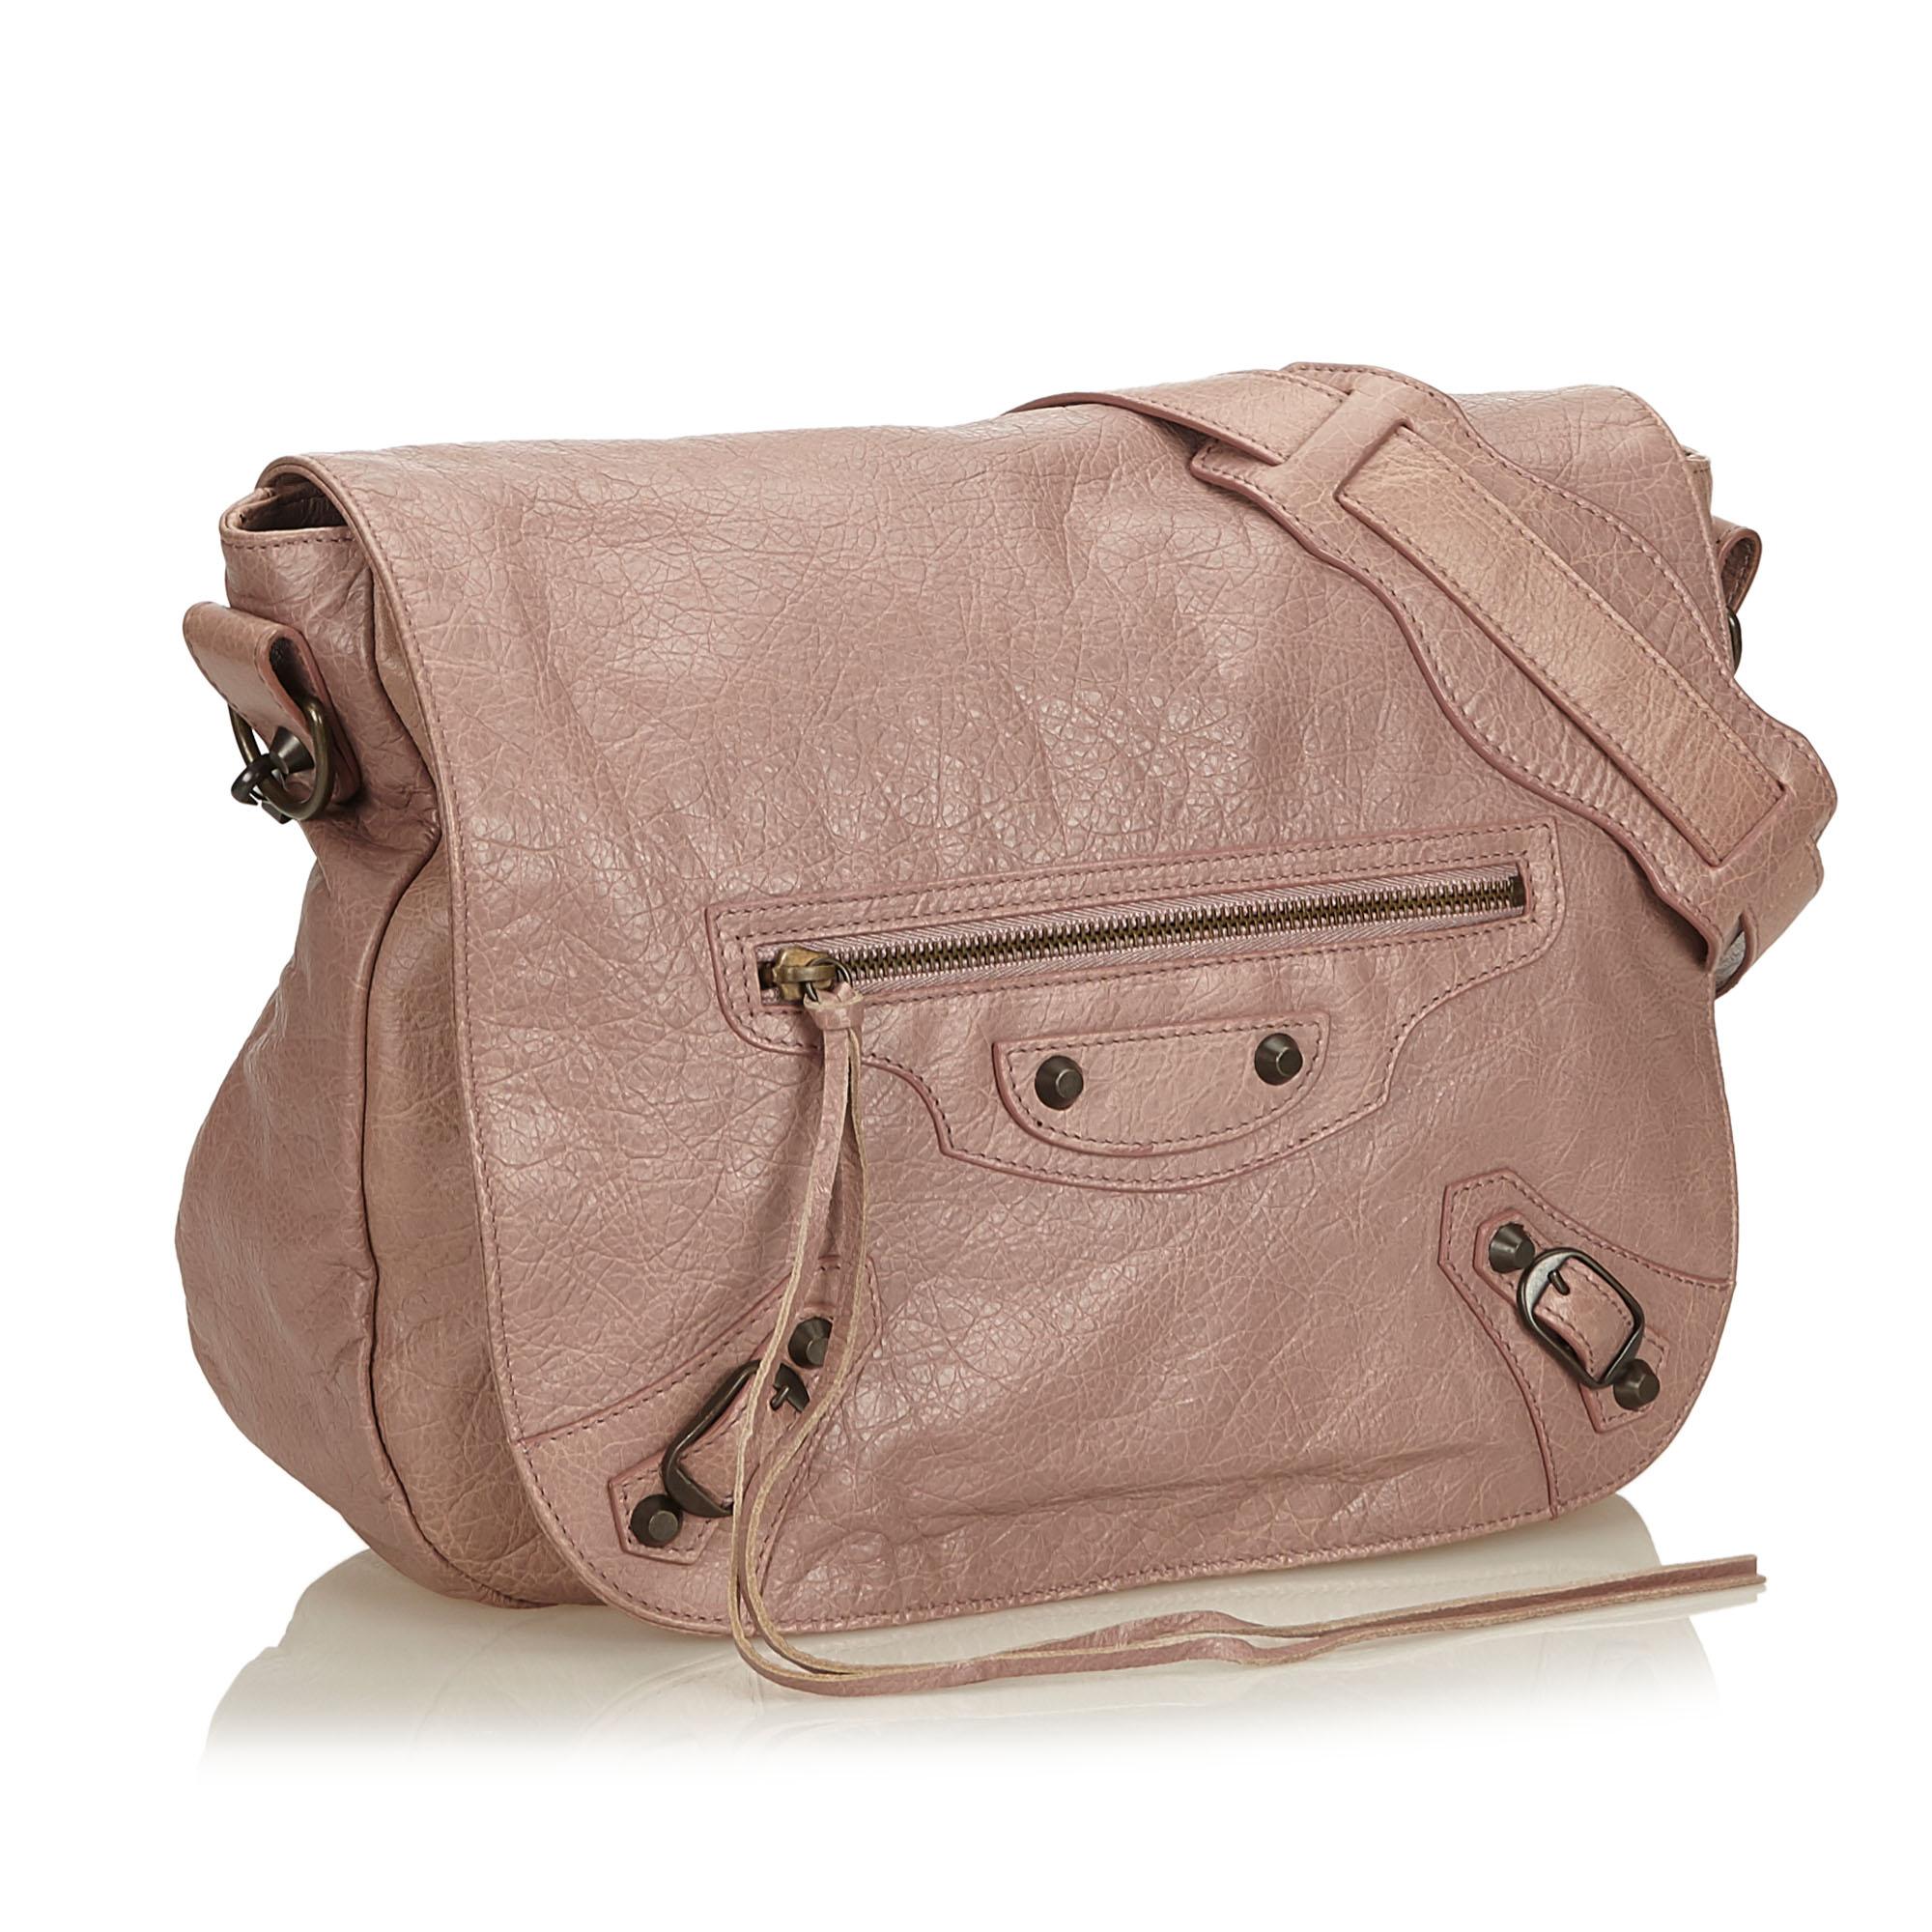 The Motocross Classic Folk features a leather body, an adjustable shoulder strap, front flap with a magnetic closure, an exterior zip pocket with tassel zipper pull detail, and an interior zip pocket. It carries as B+ condition rating.

Inclusions: